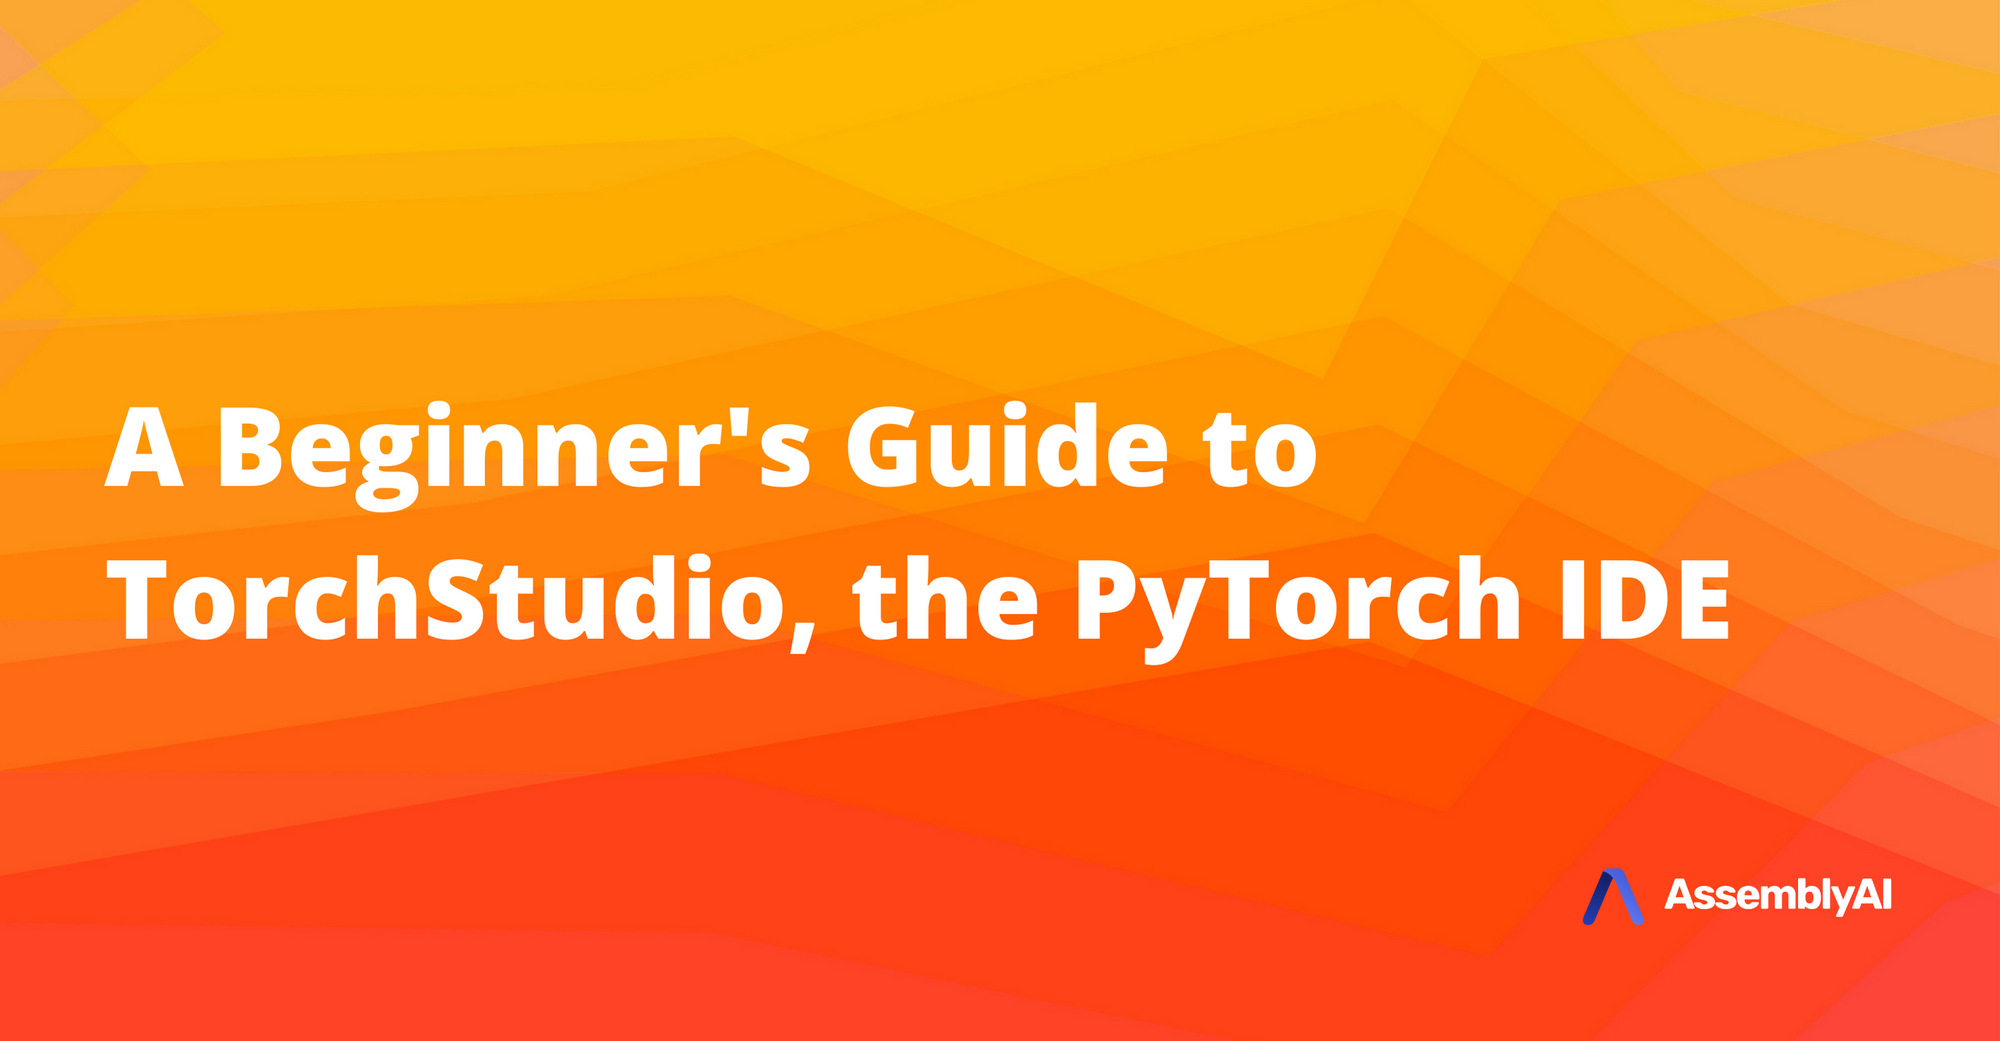 A Beginner's Guide to TorchStudio, The PyTorch IDE